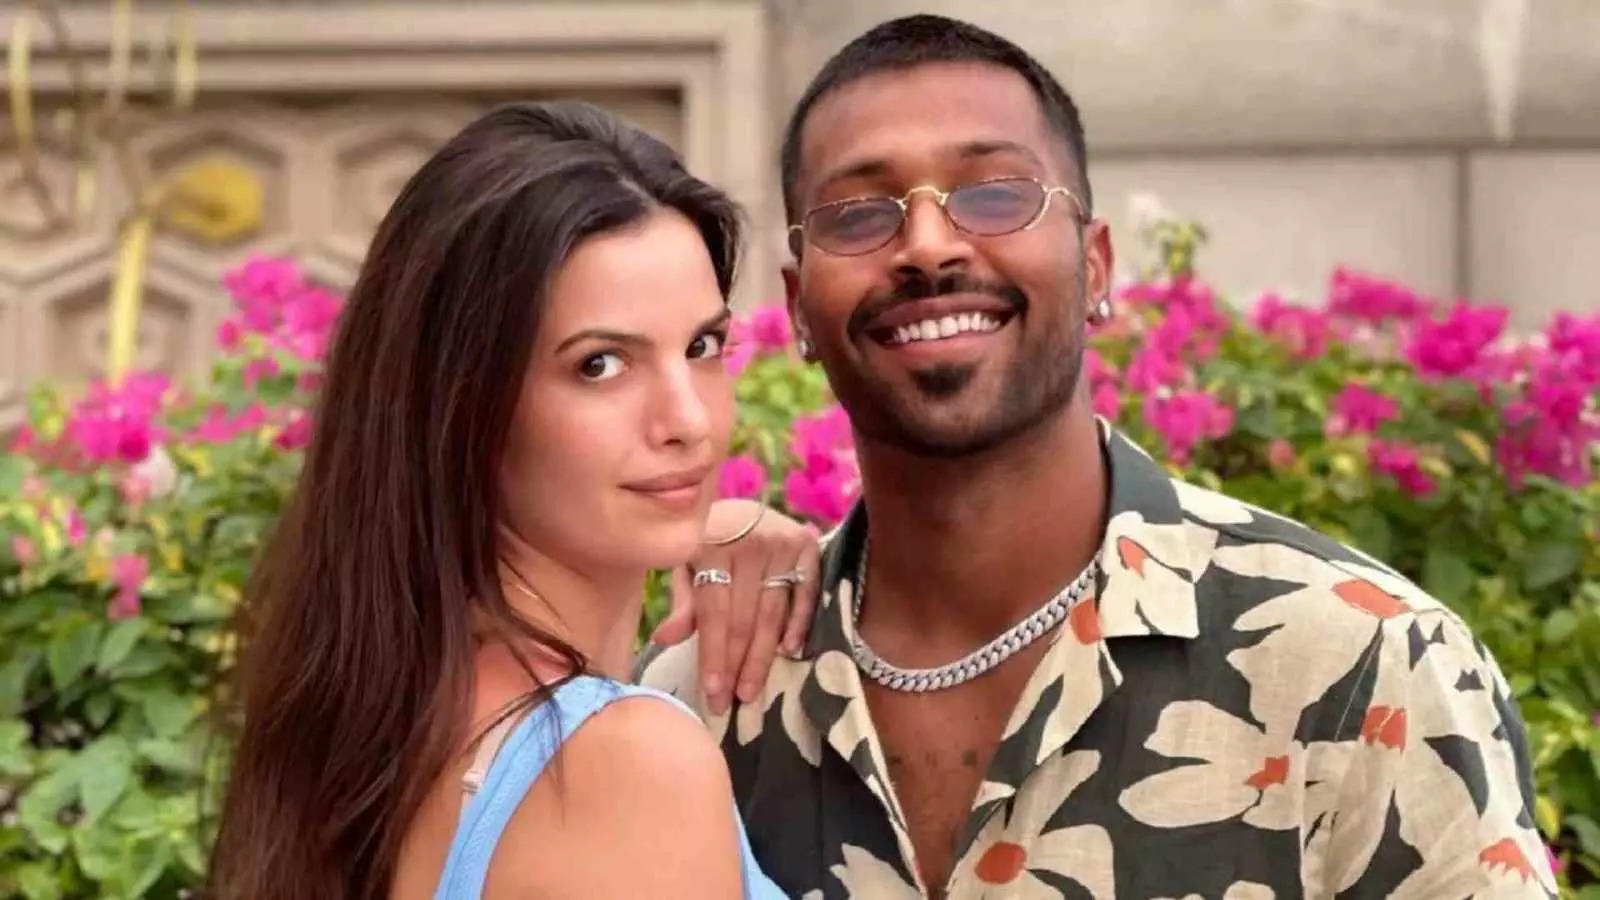 Hardik Pandya absent from T20 World Cup departure amid divorce rumors 